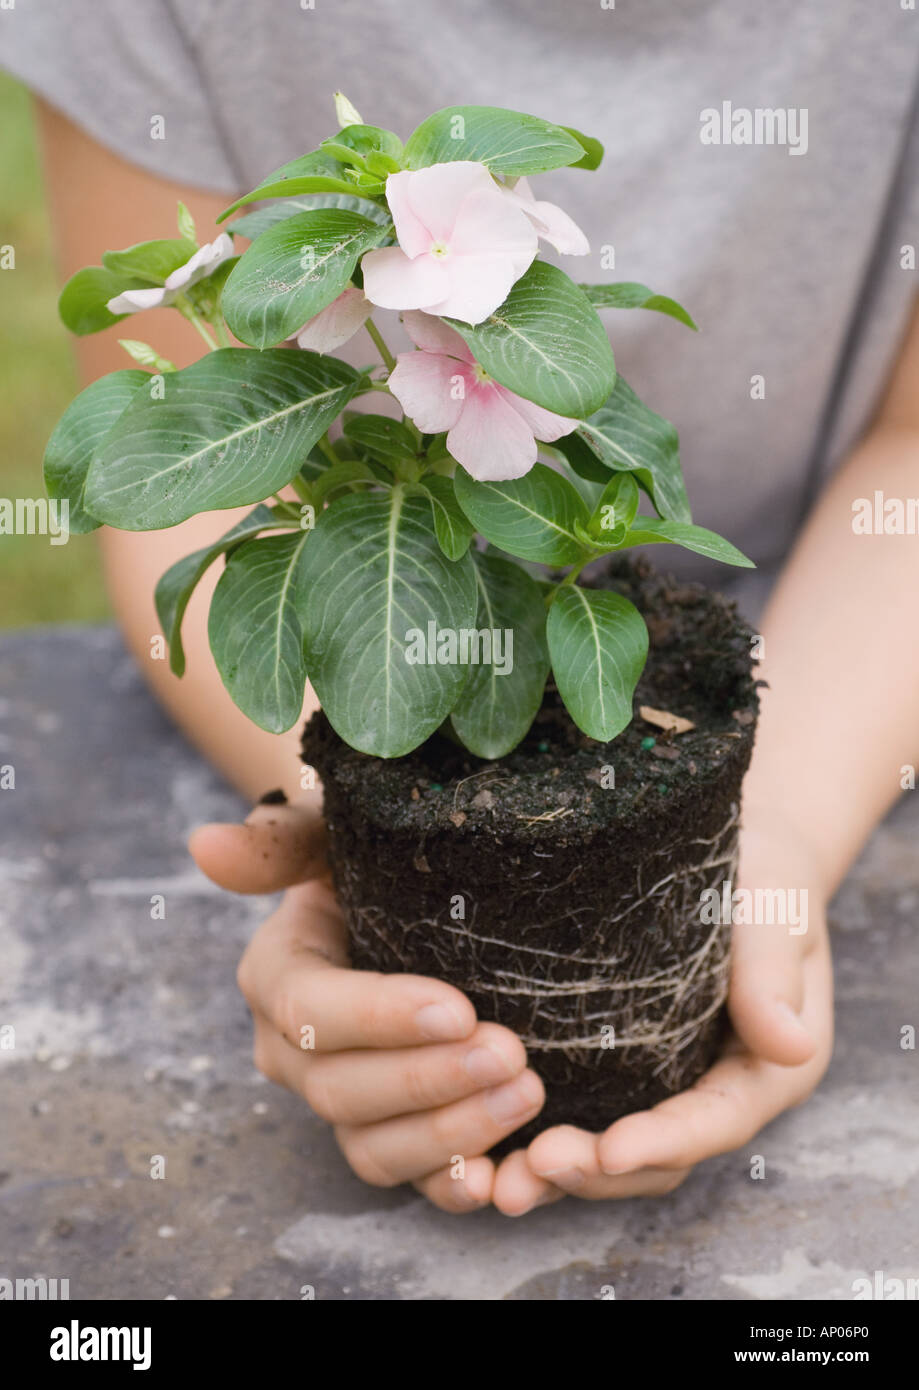 Hands holding periwinkle plant Stock Photo